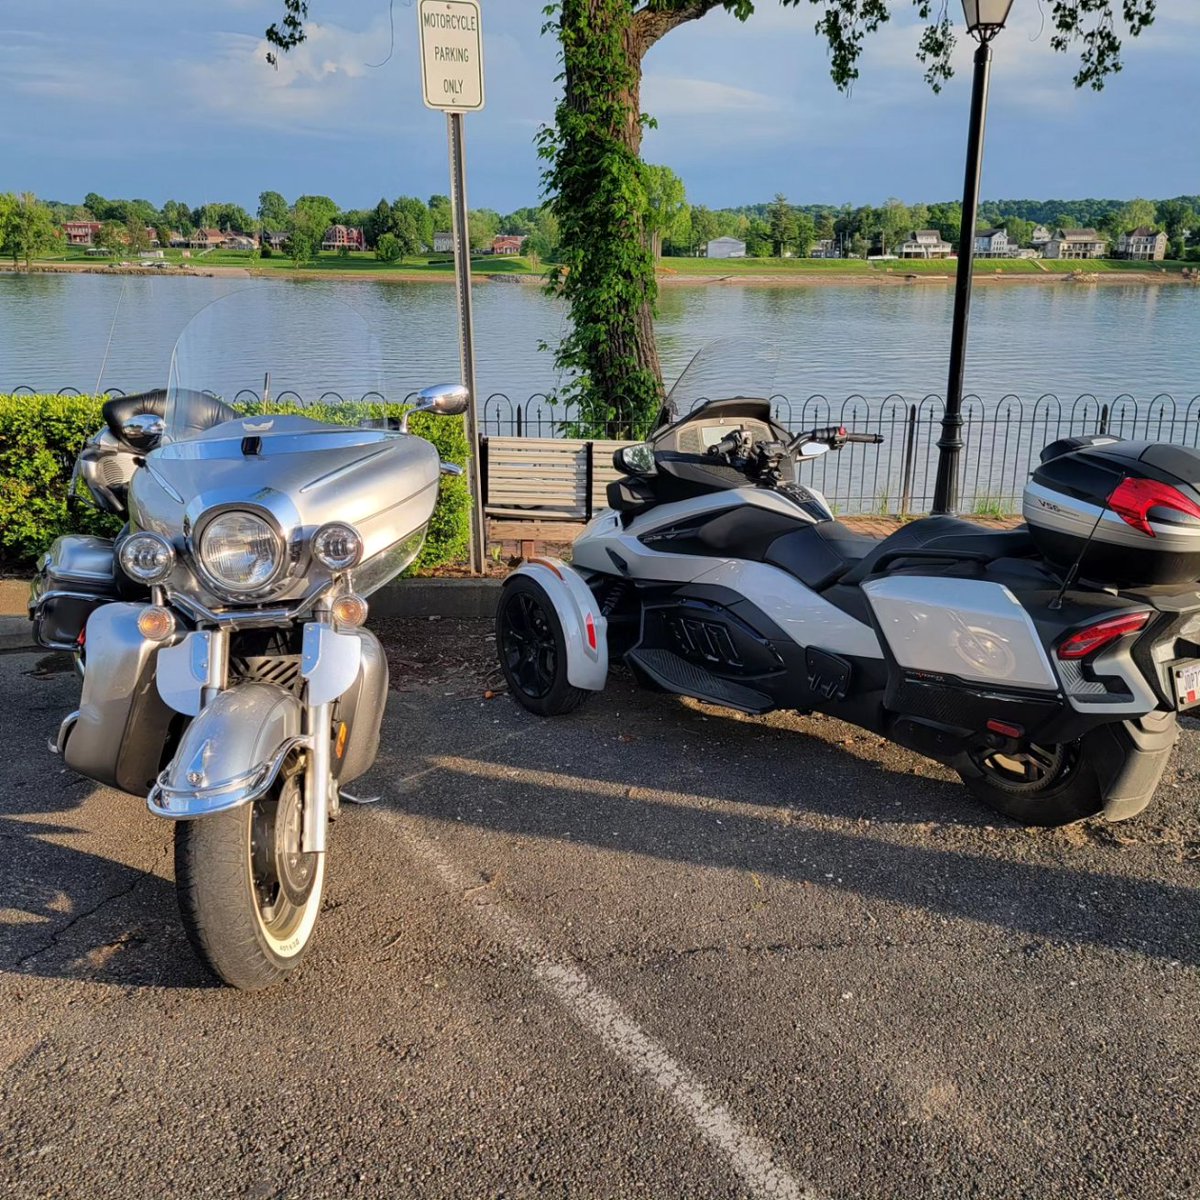 Went for an afternoon ride yesterday.  Ended up in Marietta - on threOhio River.  Had a great burger at the Lafayette Hotel.  Perfect weather.✌️ #OhioDestinations #bikelife #spyderlife #StreetIronGear